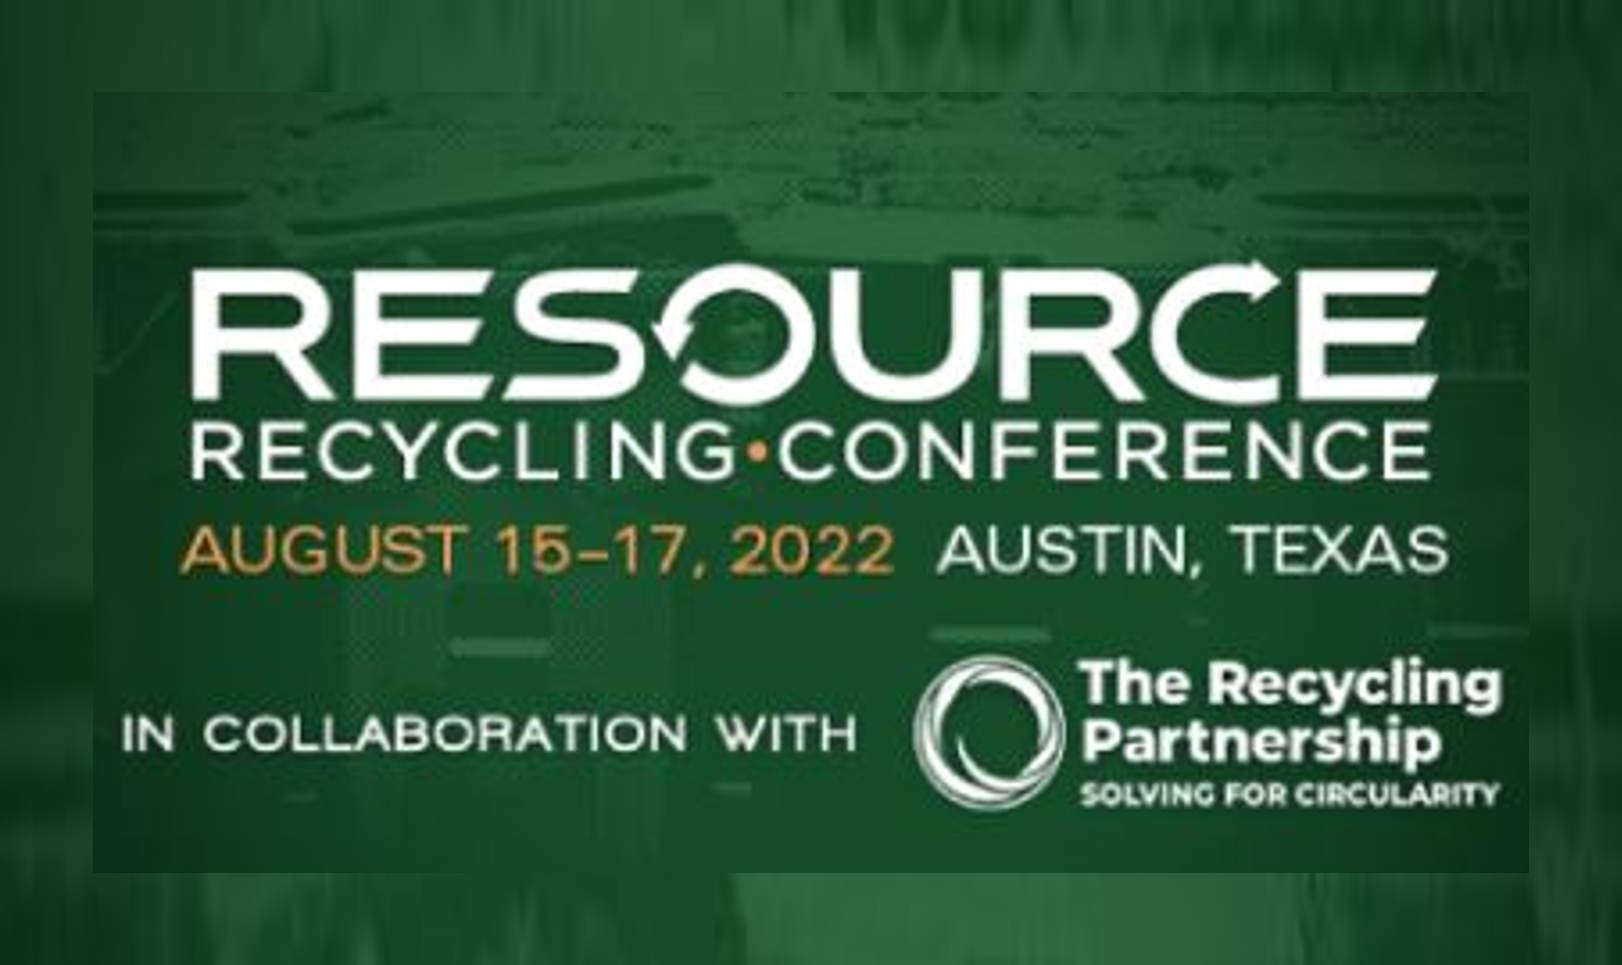 We are exhibiting at the 2022 Resource Recycling Conference in Austin